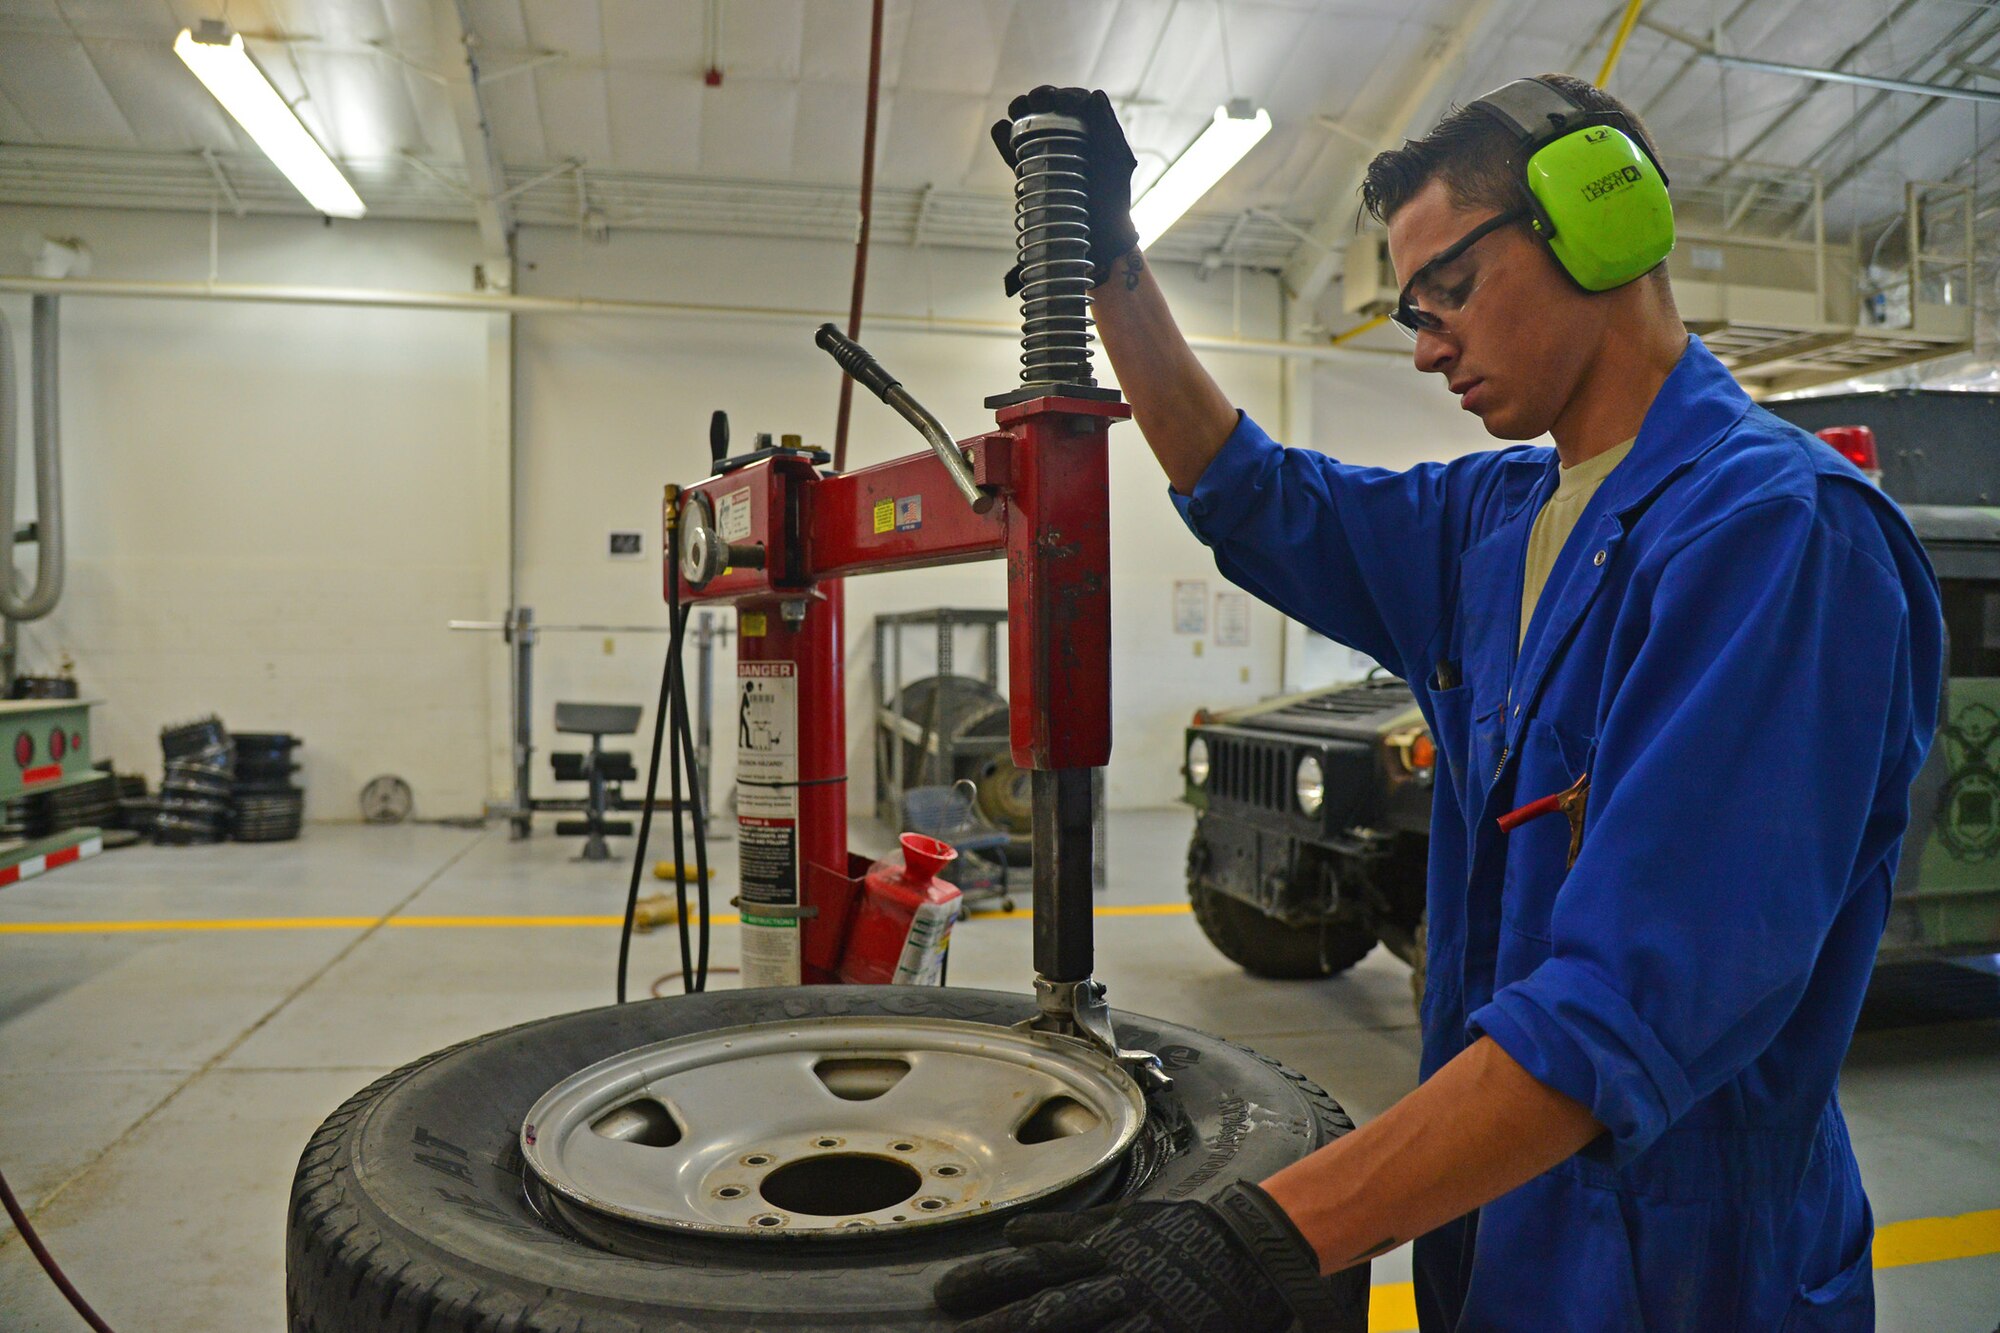 Senior Airman Brennan Popp, 341st Logistics Readiness Squadron mission generating vehicular equipment maintenance technician, mounts a tire onto a rim July 7, 2016, at Malmstrom Air Force Base, Mont. Afterwards, the wheel is filled with the correct amount of air and bolted onto a vehicle. (U.S. Air Force photo/Airman 1st Class Daniel Brosam)